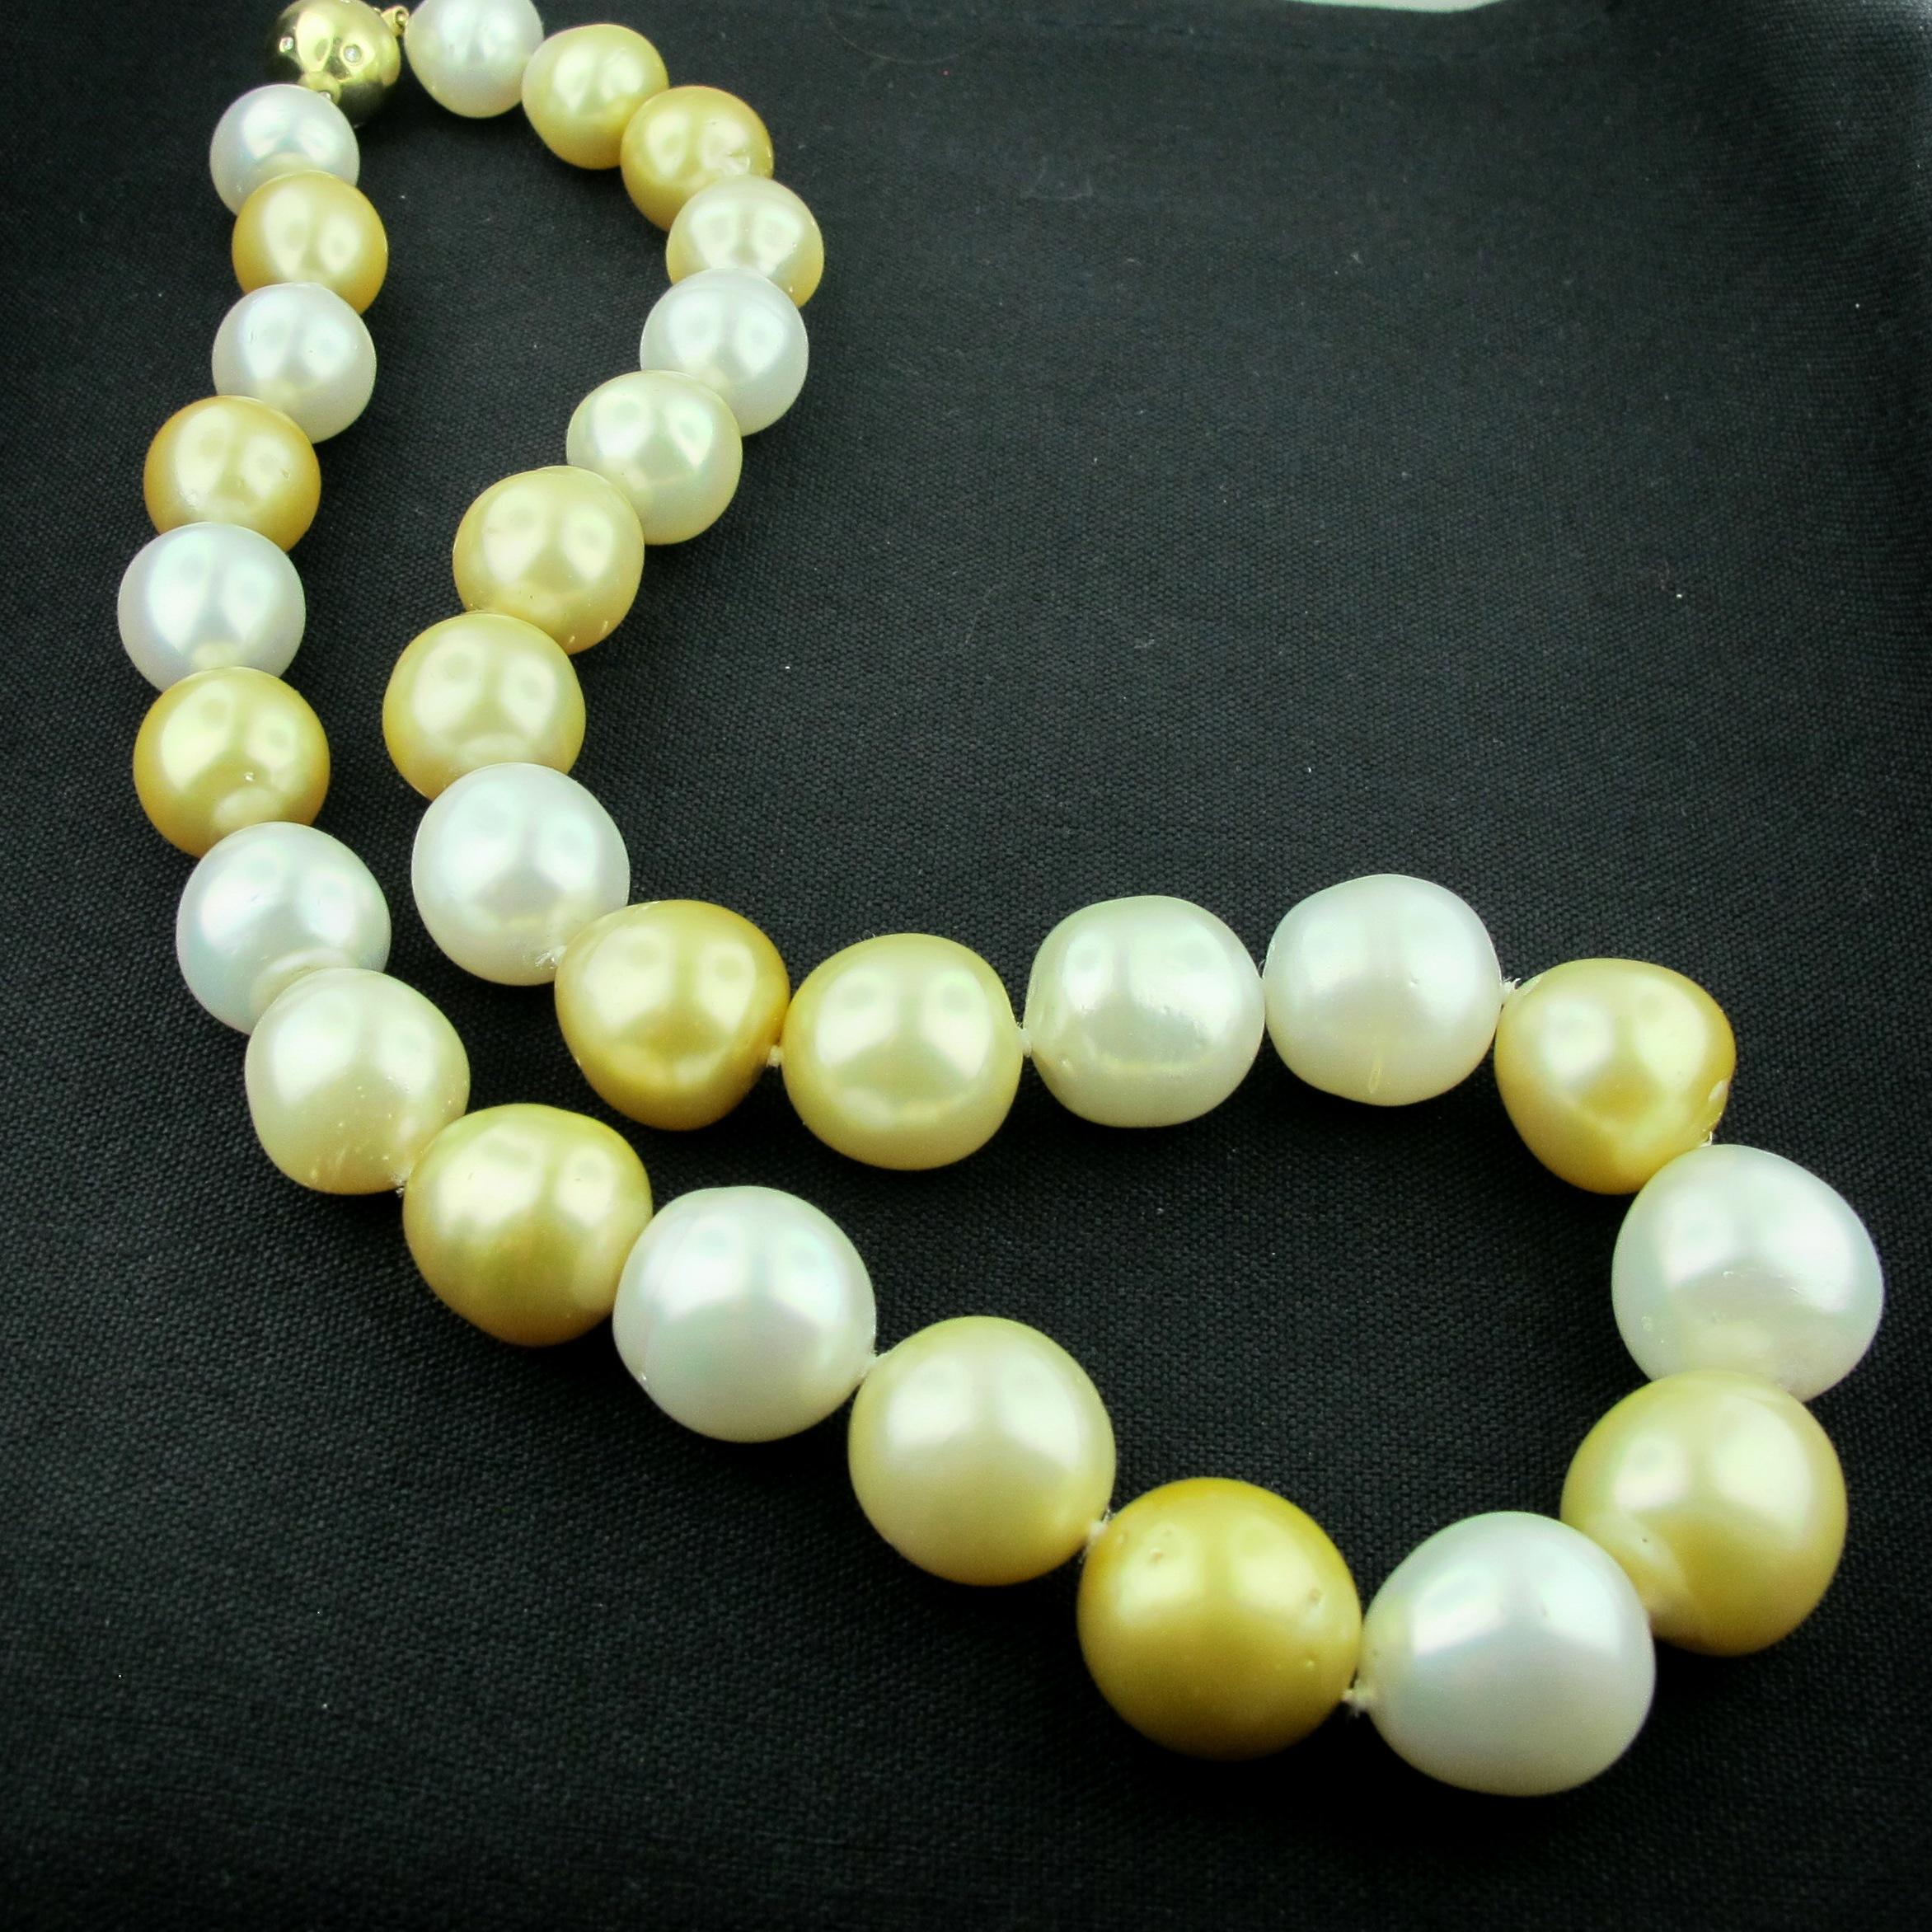 White and Golden South Sea Pearl Necklace with 14 KT Yellow Gold & Diamond Clasp In Excellent Condition For Sale In Palm Desert, CA